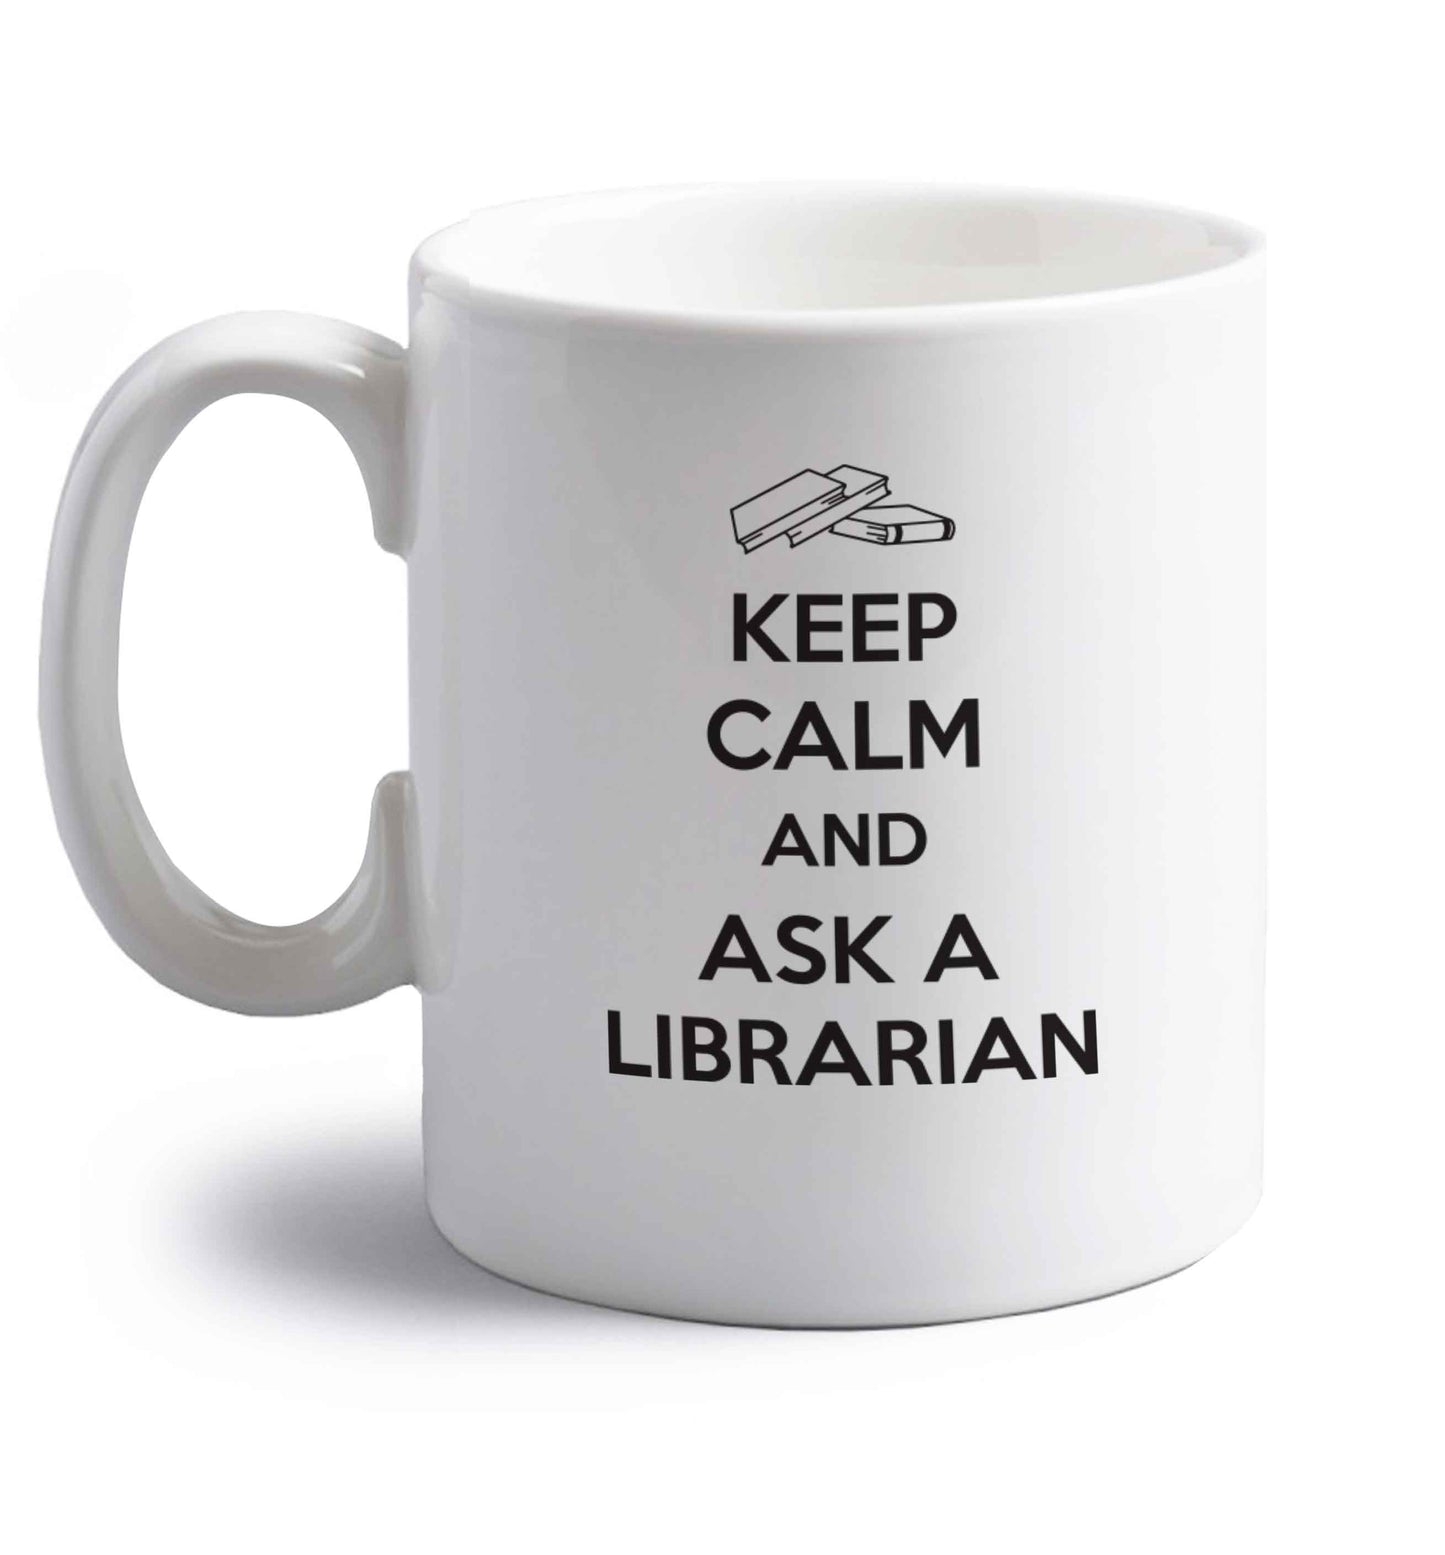 Keep calm and ask a librarian right handed white ceramic mug 